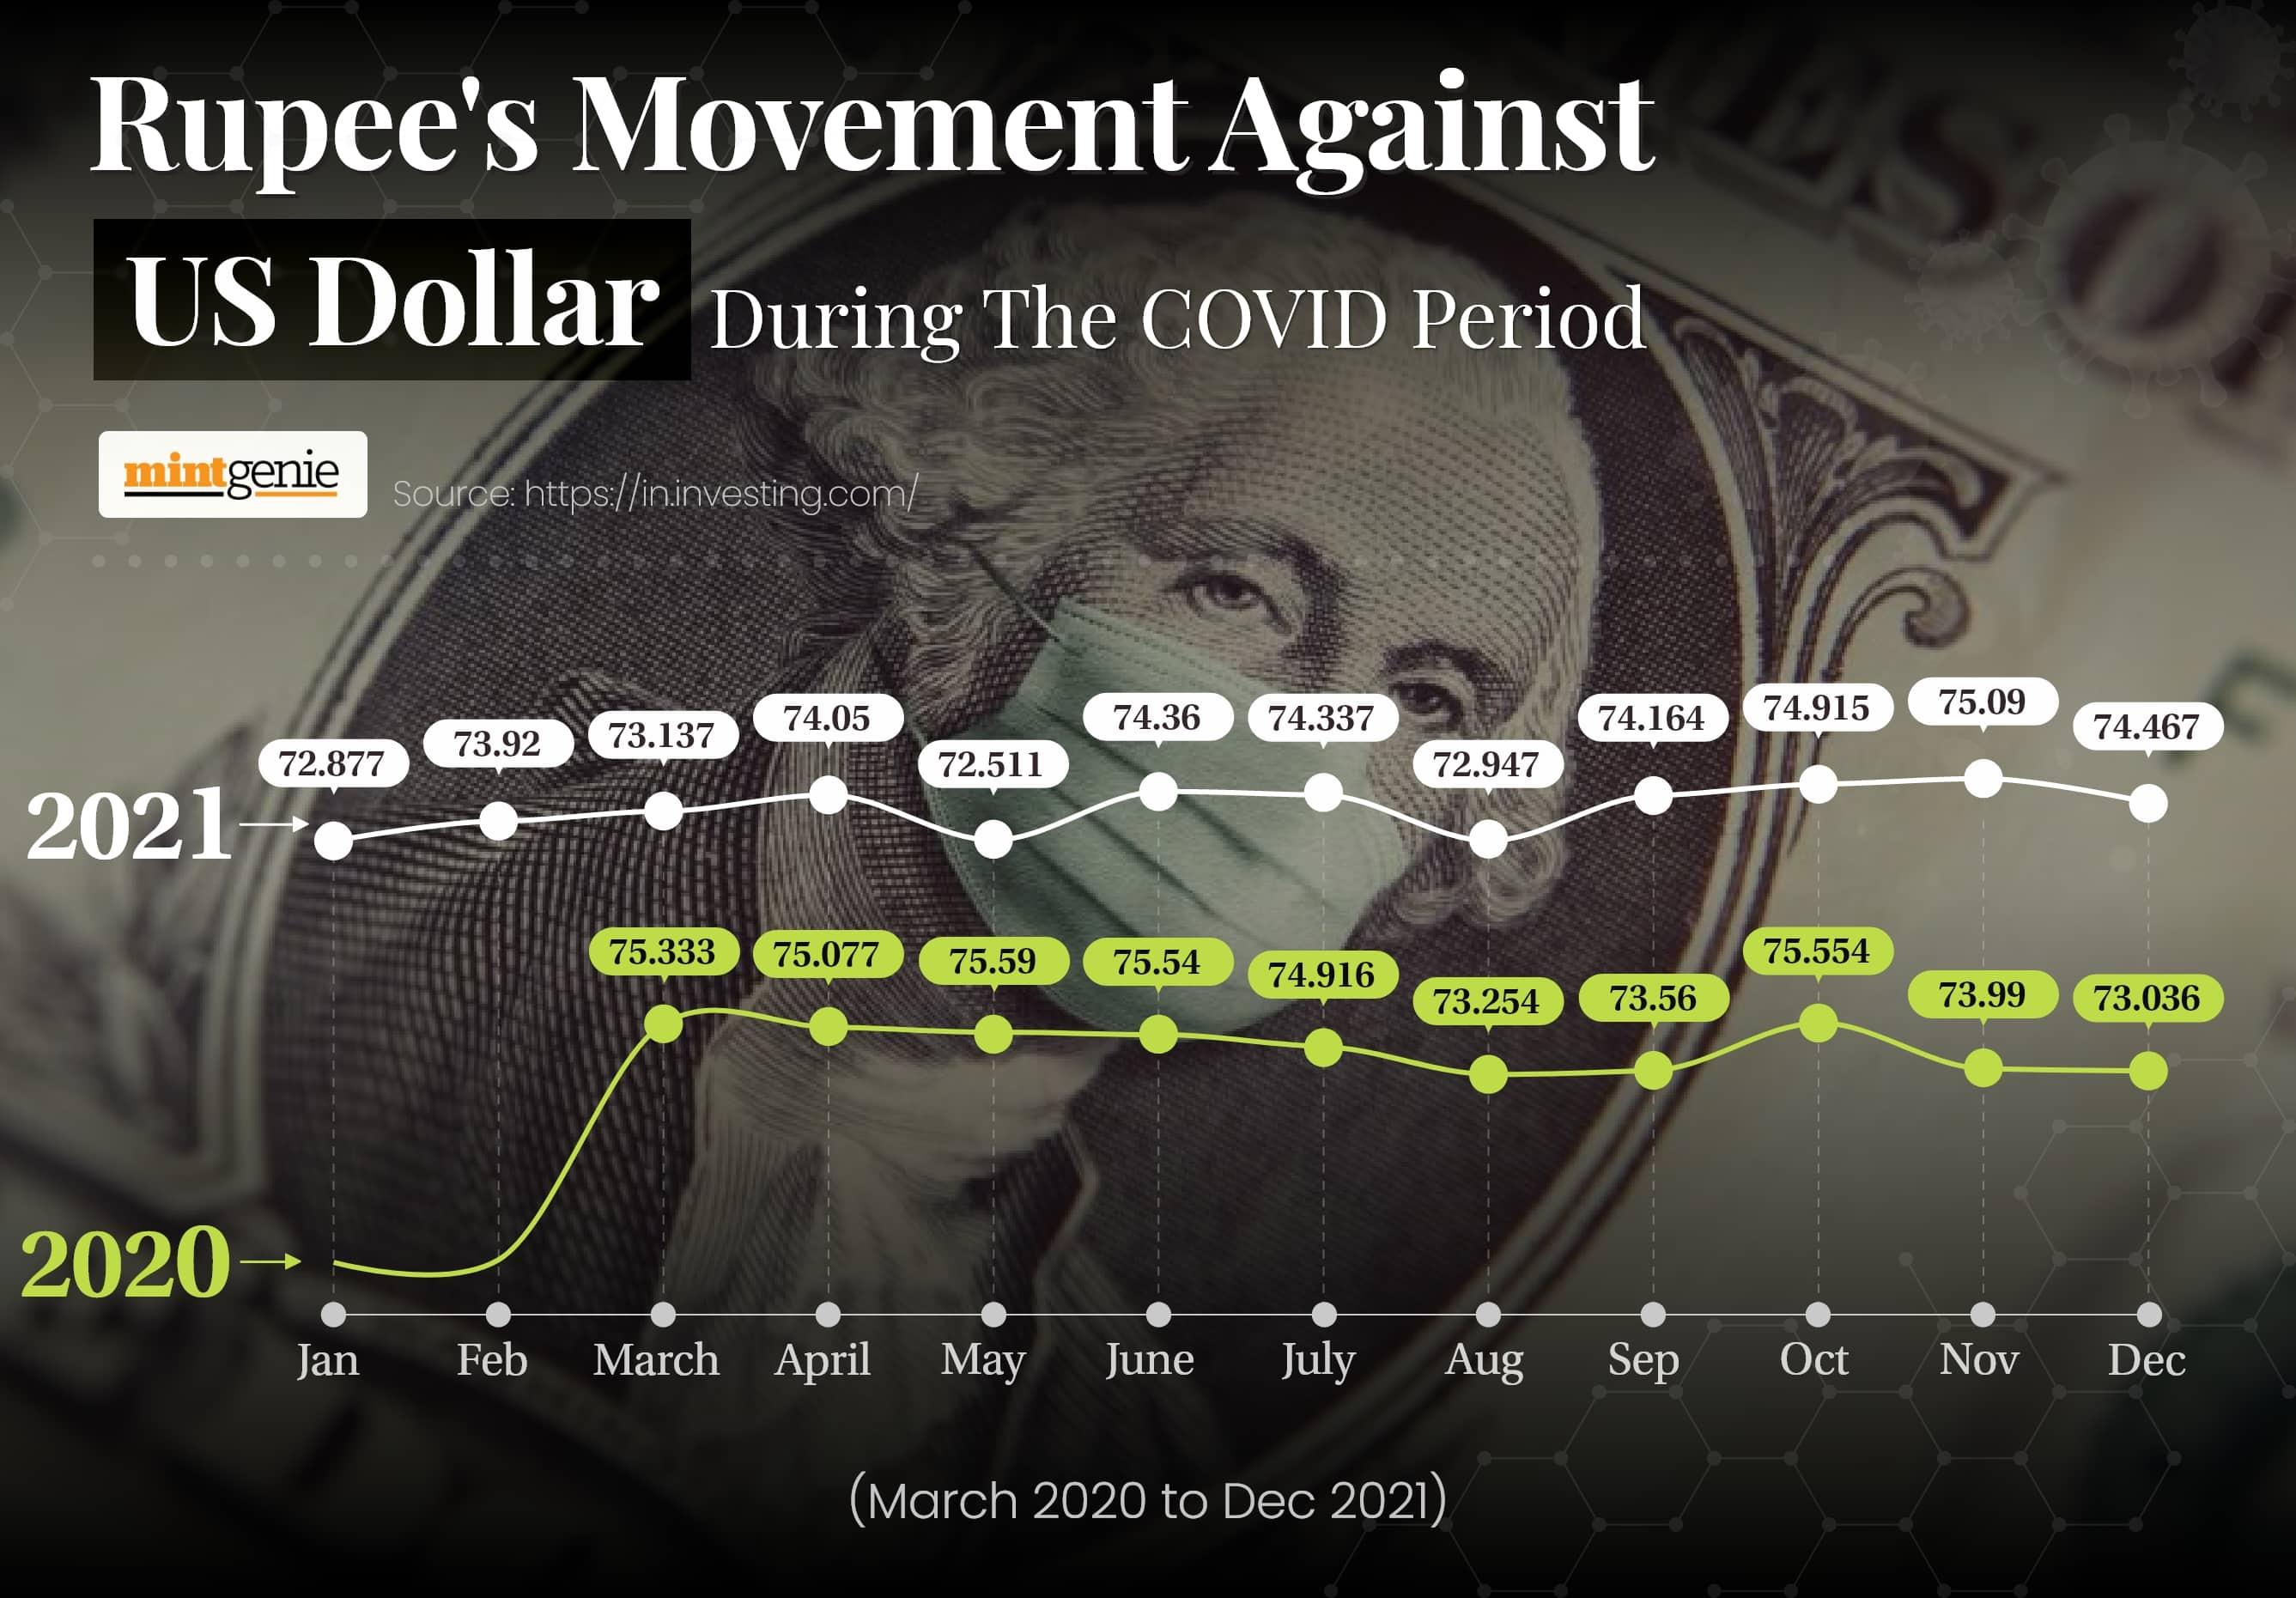 We explain here rupee’s movement against US dollar during the COVID period